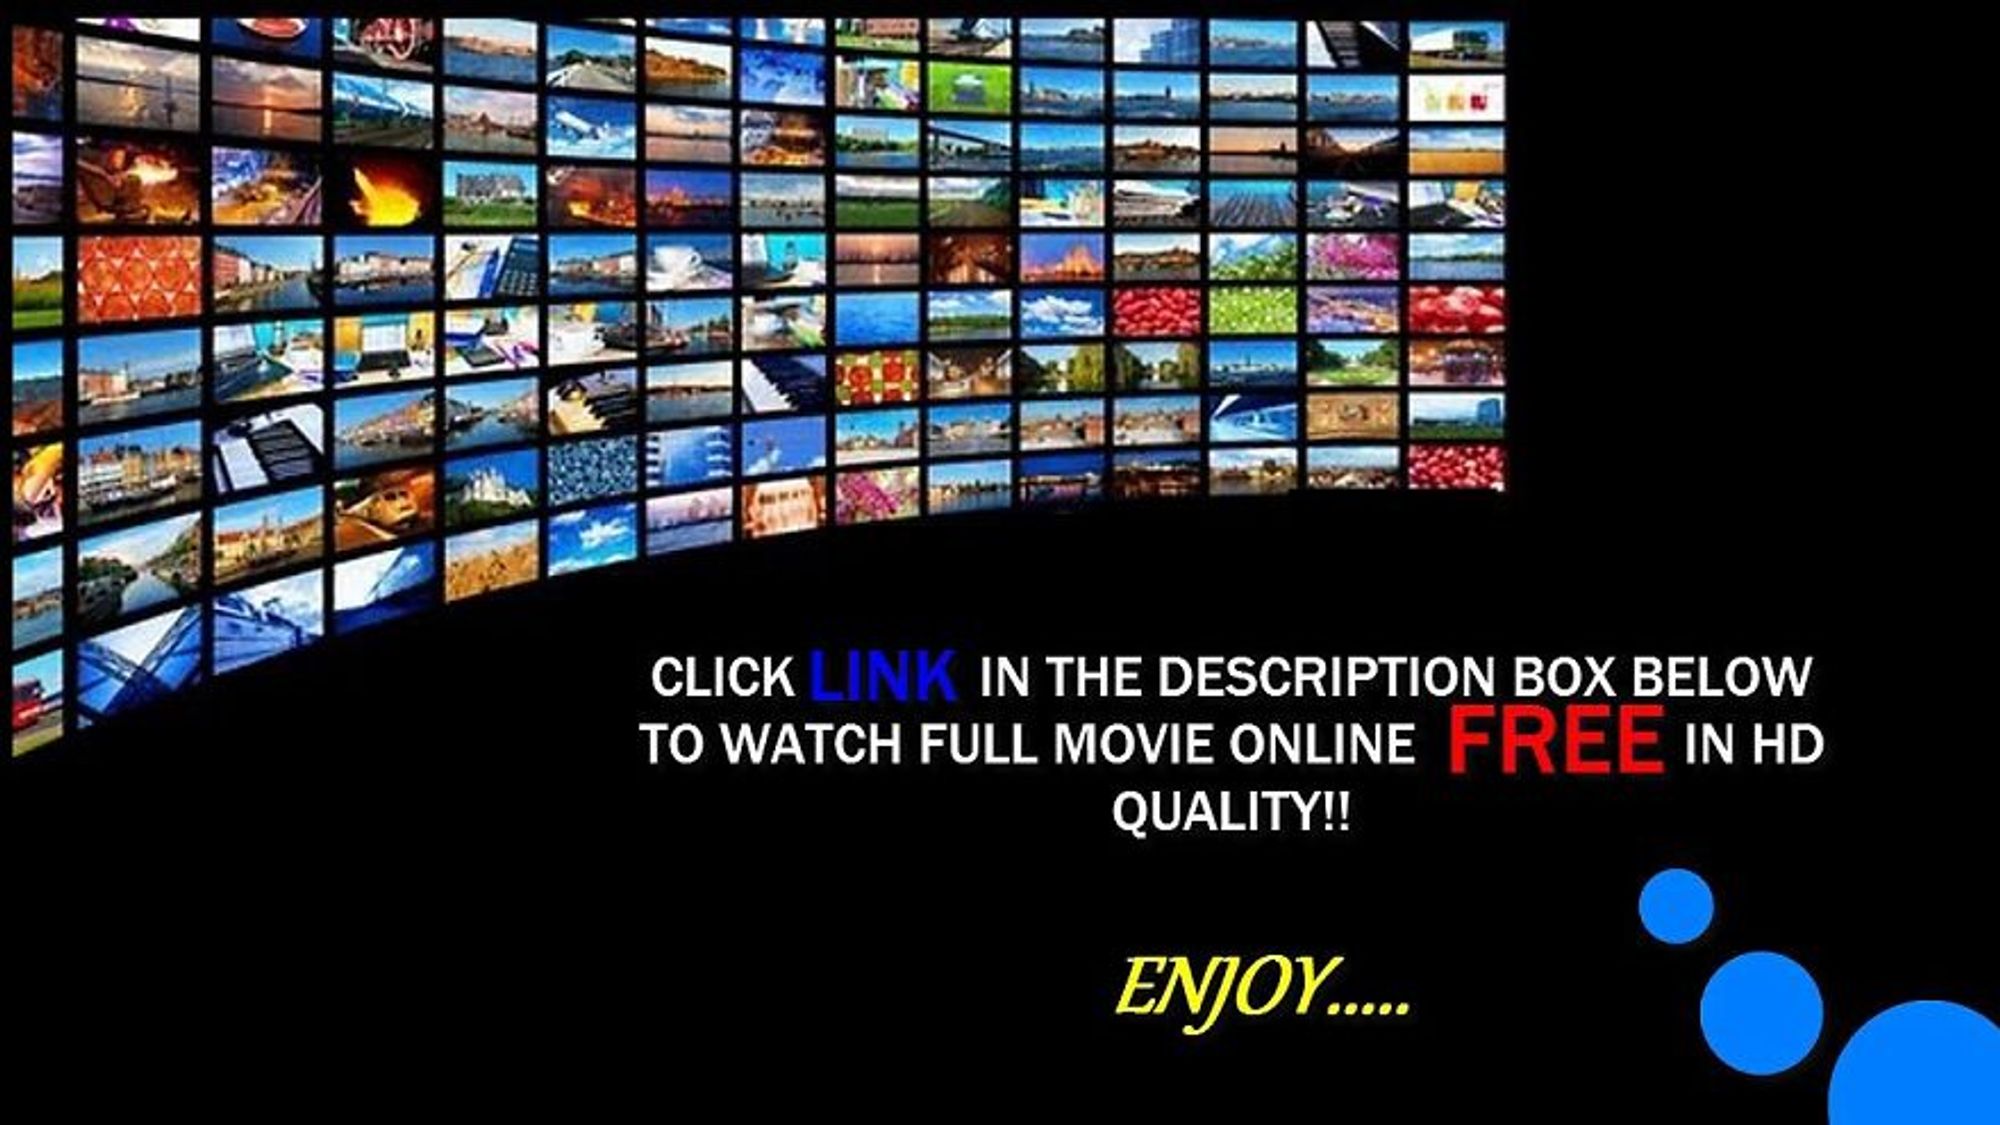 Streaming Watch Hd Hd Full The Lion King Online Movie